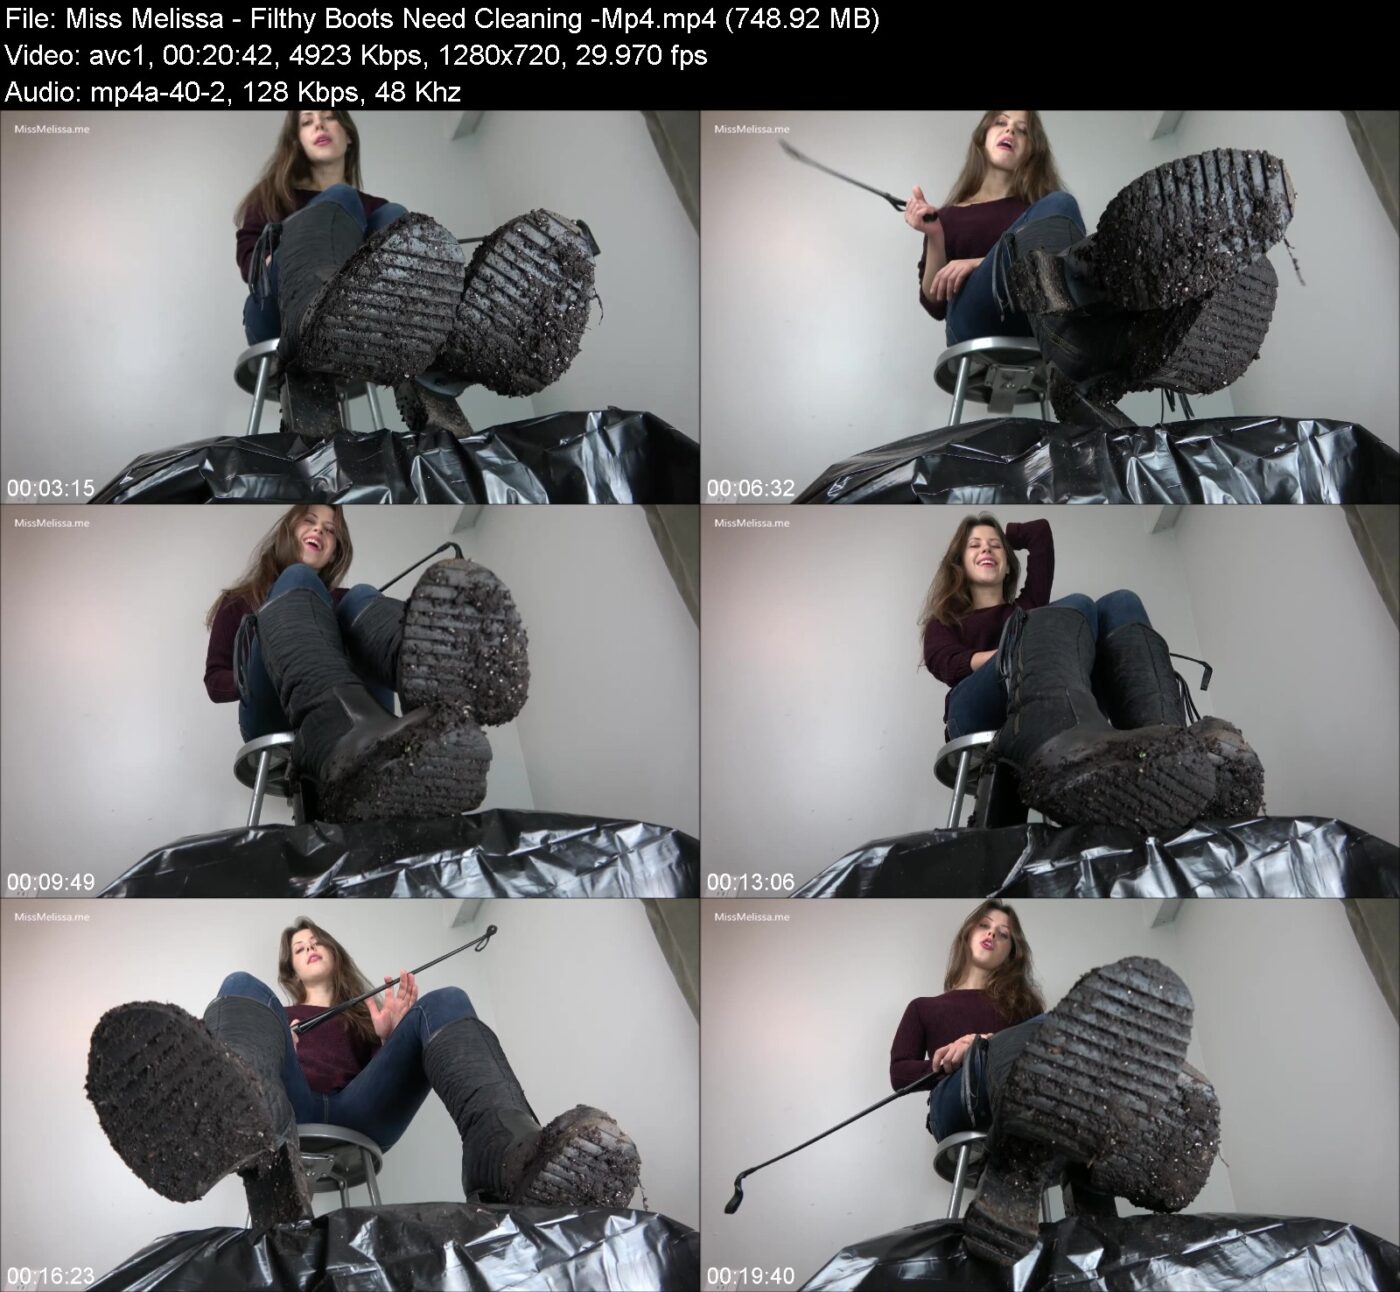 Miss Melissa - Filthy Boots Need Cleaning -Mp4